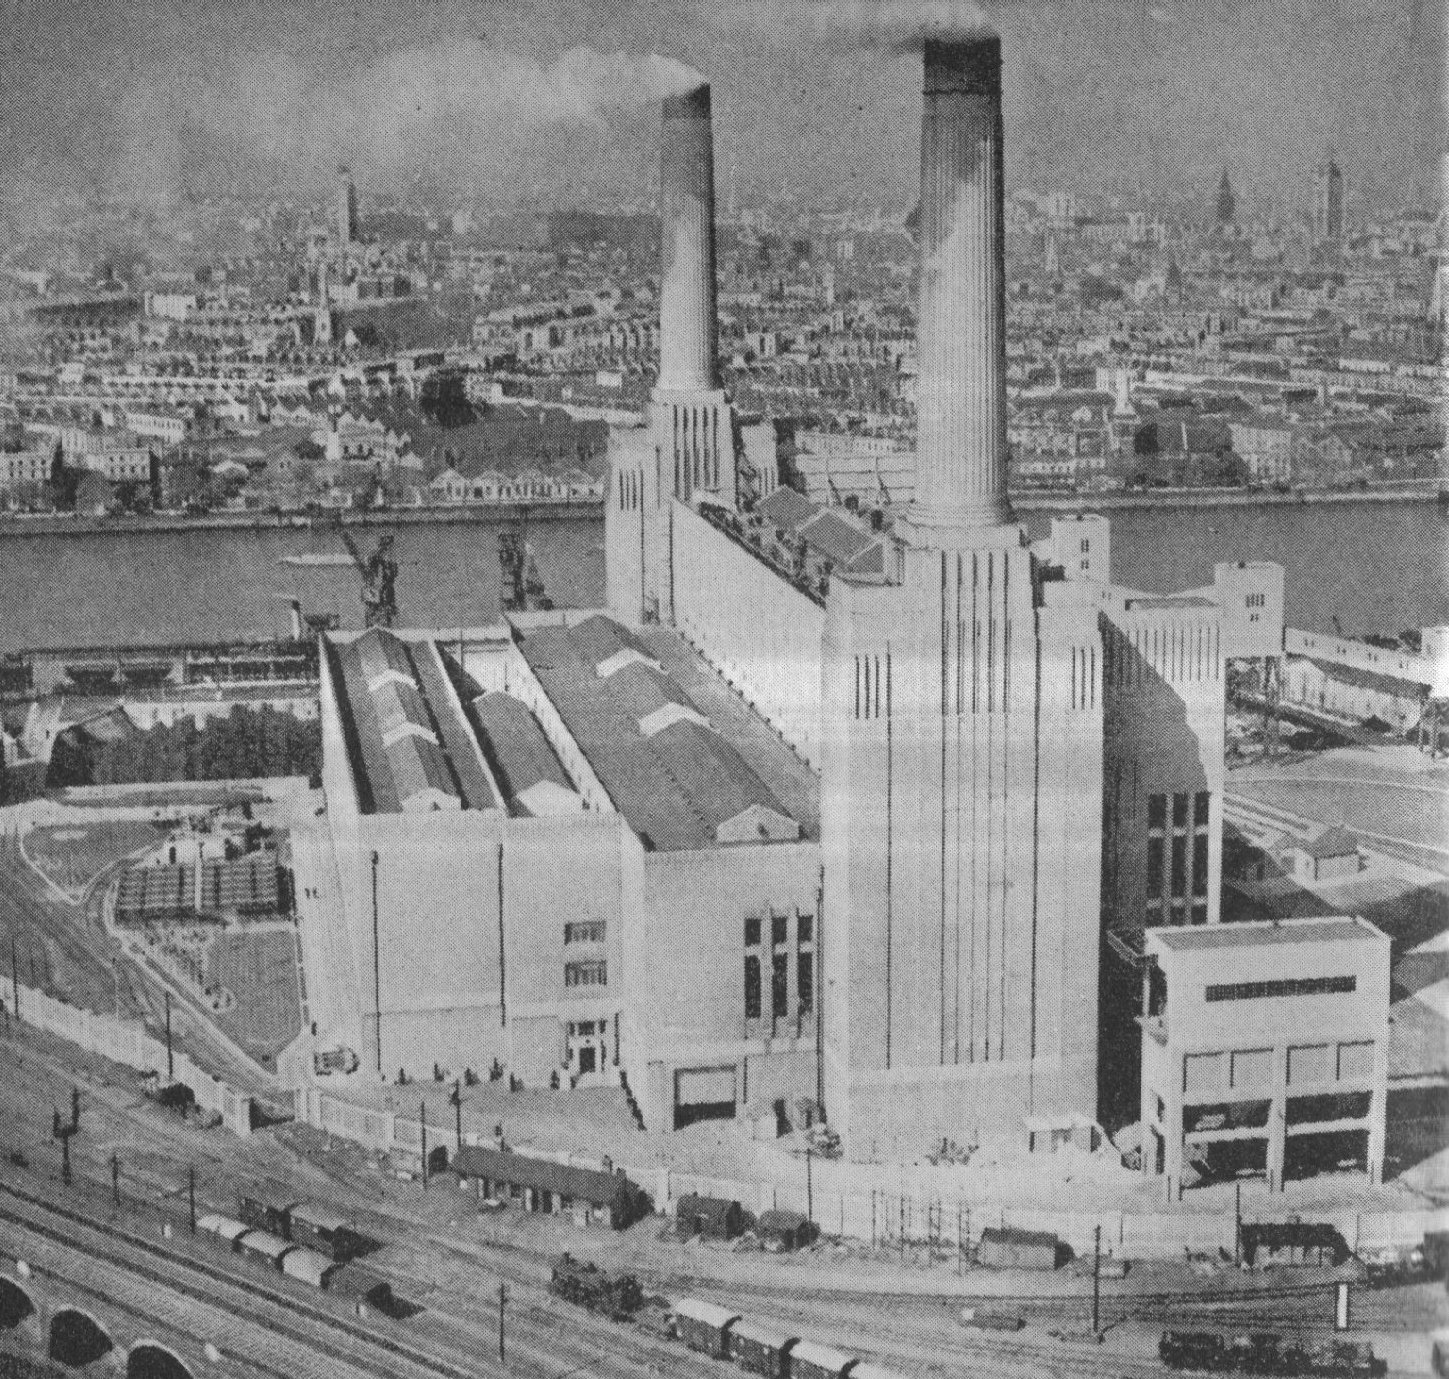 Battersea_Power_Station,_1934_with_only_two_chimneys_(Our_Generation,_1938).jpg